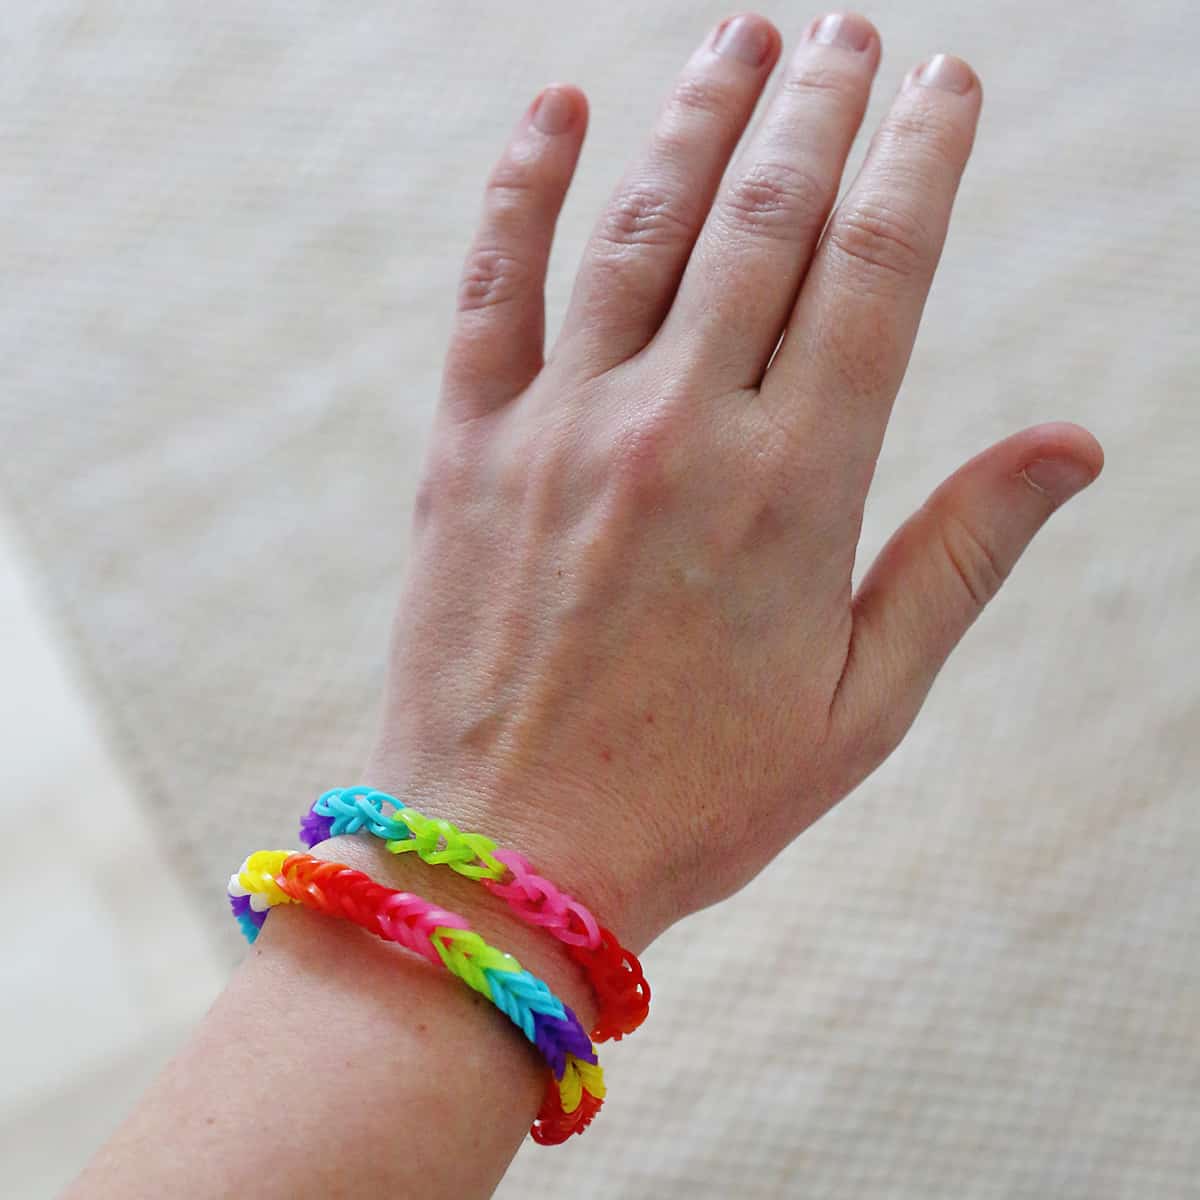 rubber band bracelets without the loom!